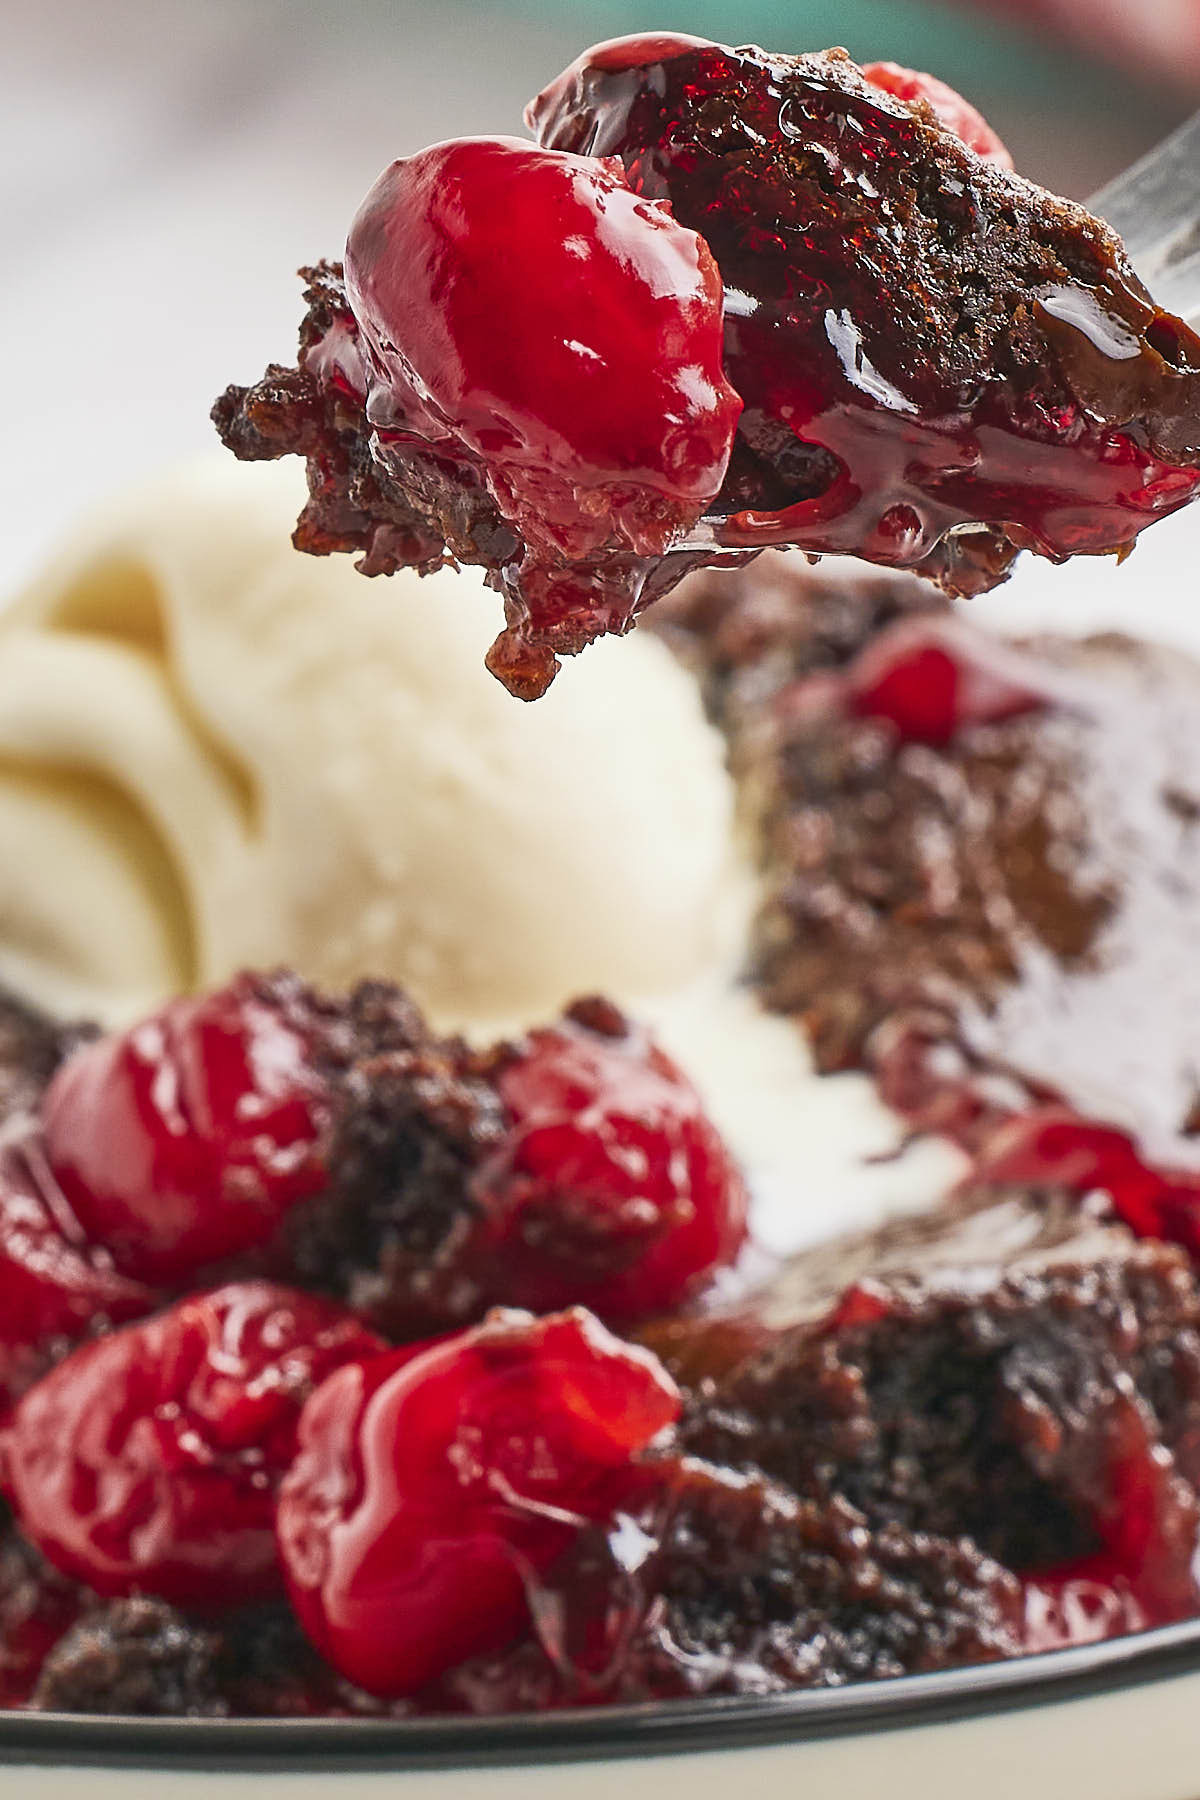 Chocolate dump cake with cherries and ice cream on a plate, perfect for indulging in a delightful dessert.